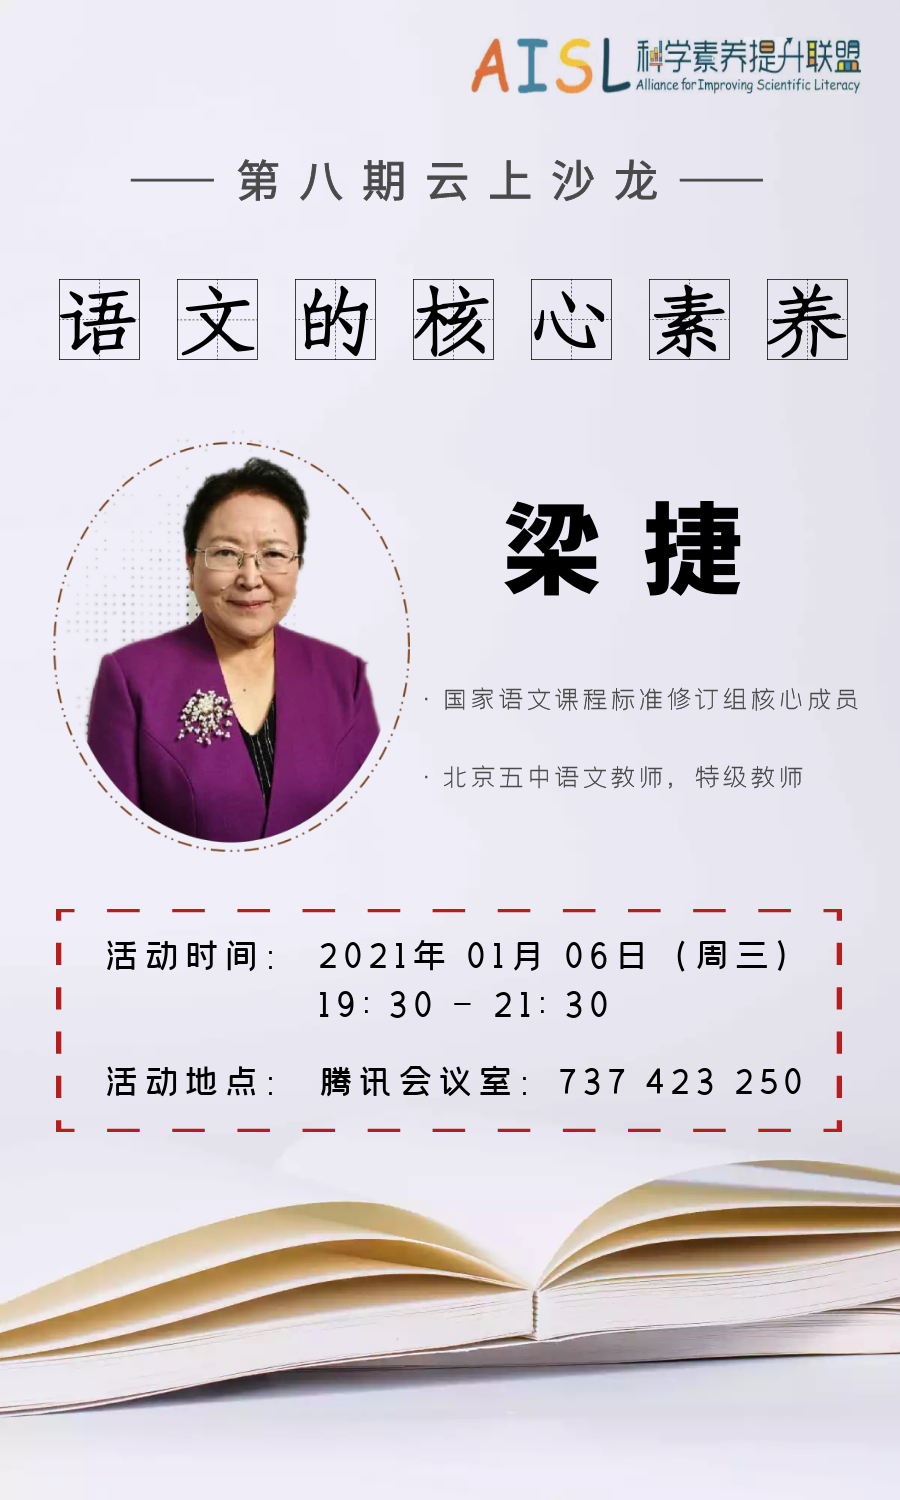 [SSI Learning] 第八期沙龙预告：梁捷——语文的核心素养<br>Notice for the eighth cloud salon: Jie Liang’s understanding of Chinese core competencies插图